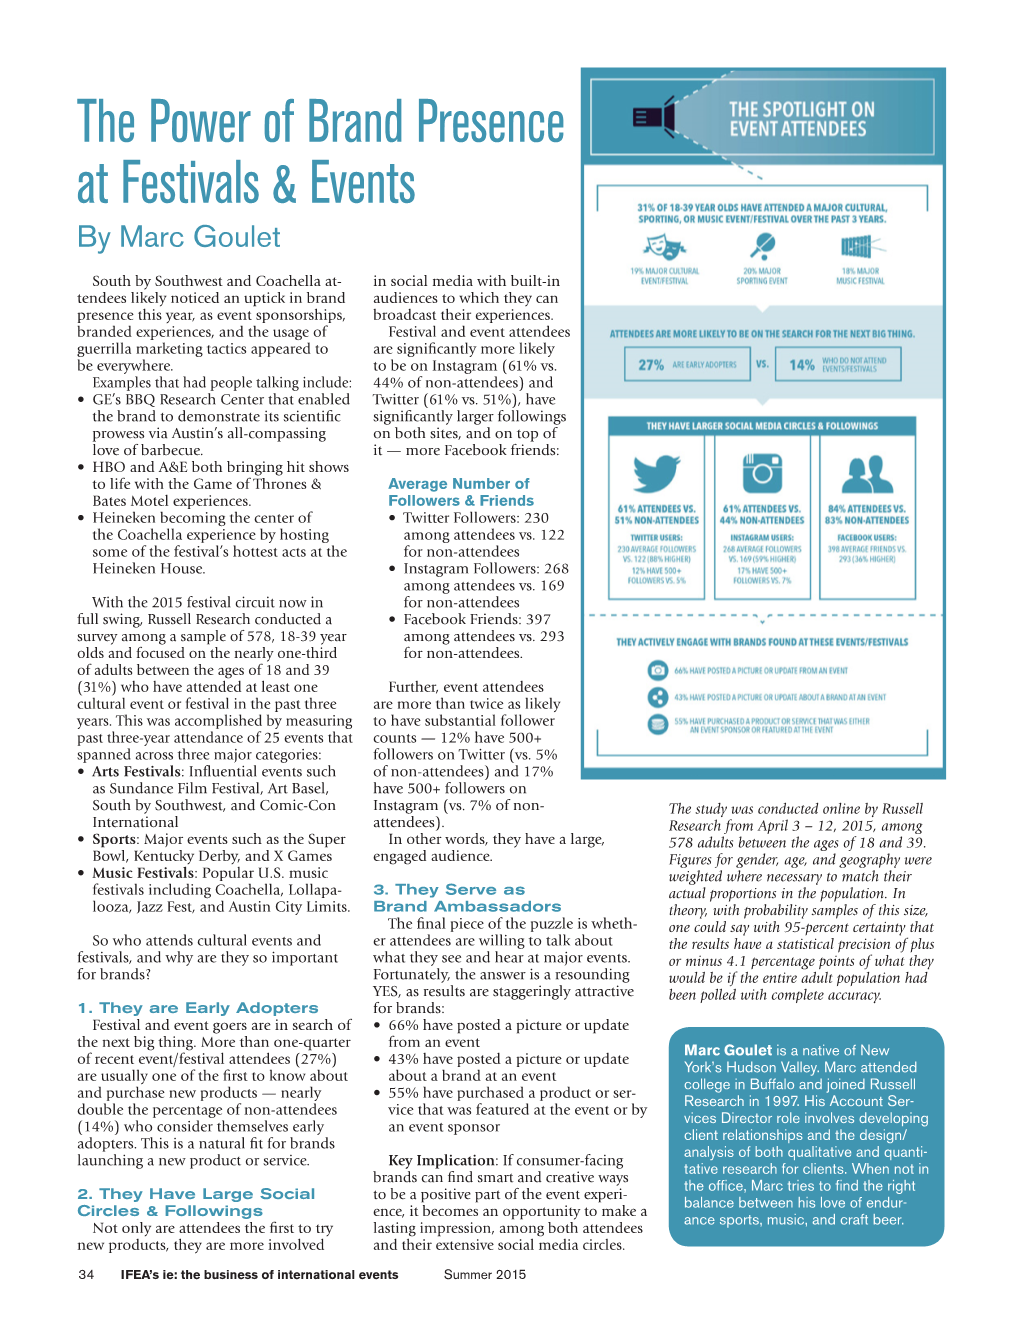 The Power of Brand Presence at Festivals & Events